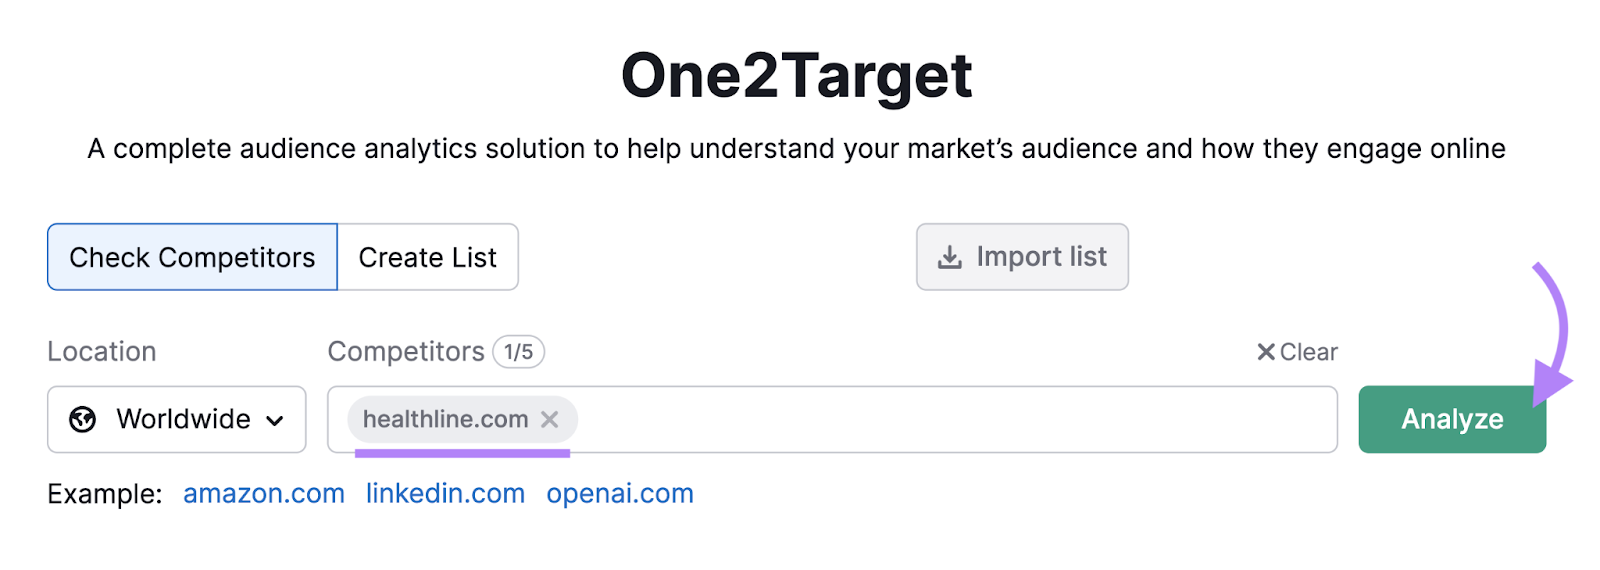 "healthline.com" entered into the One2Target tool search bar